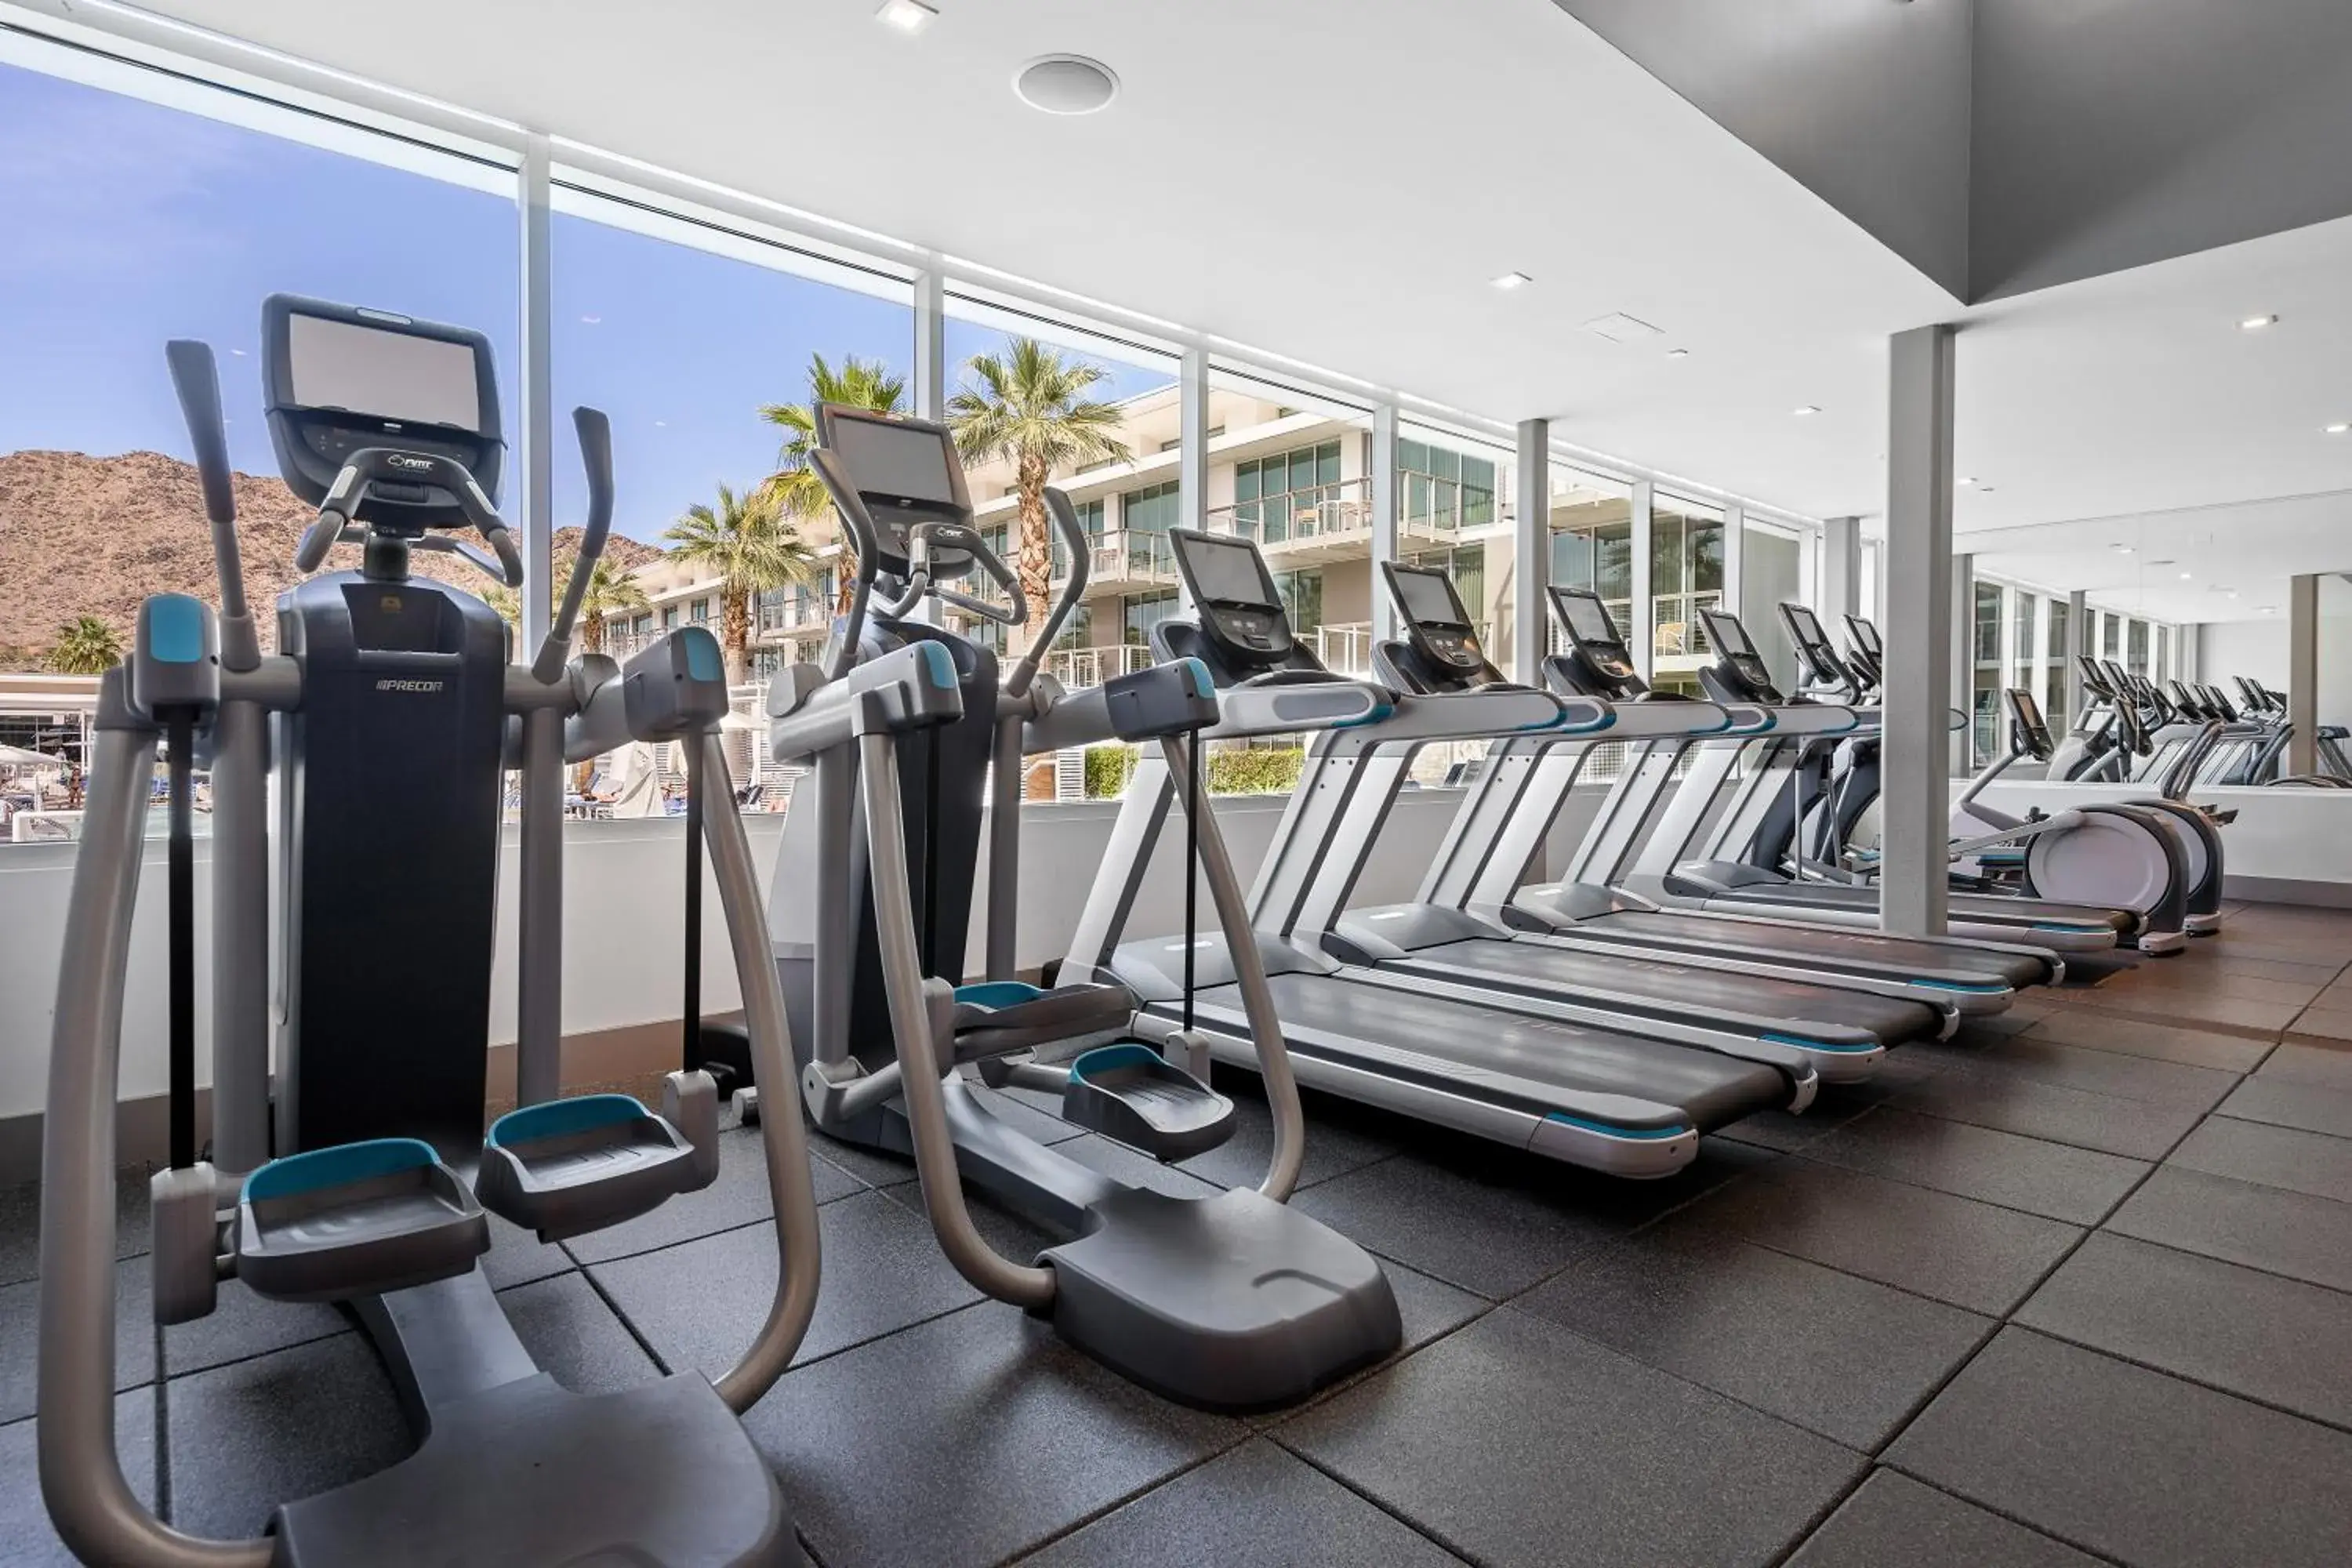 Fitness Center/Facilities in Mountain Shadows Resort Scottsdale